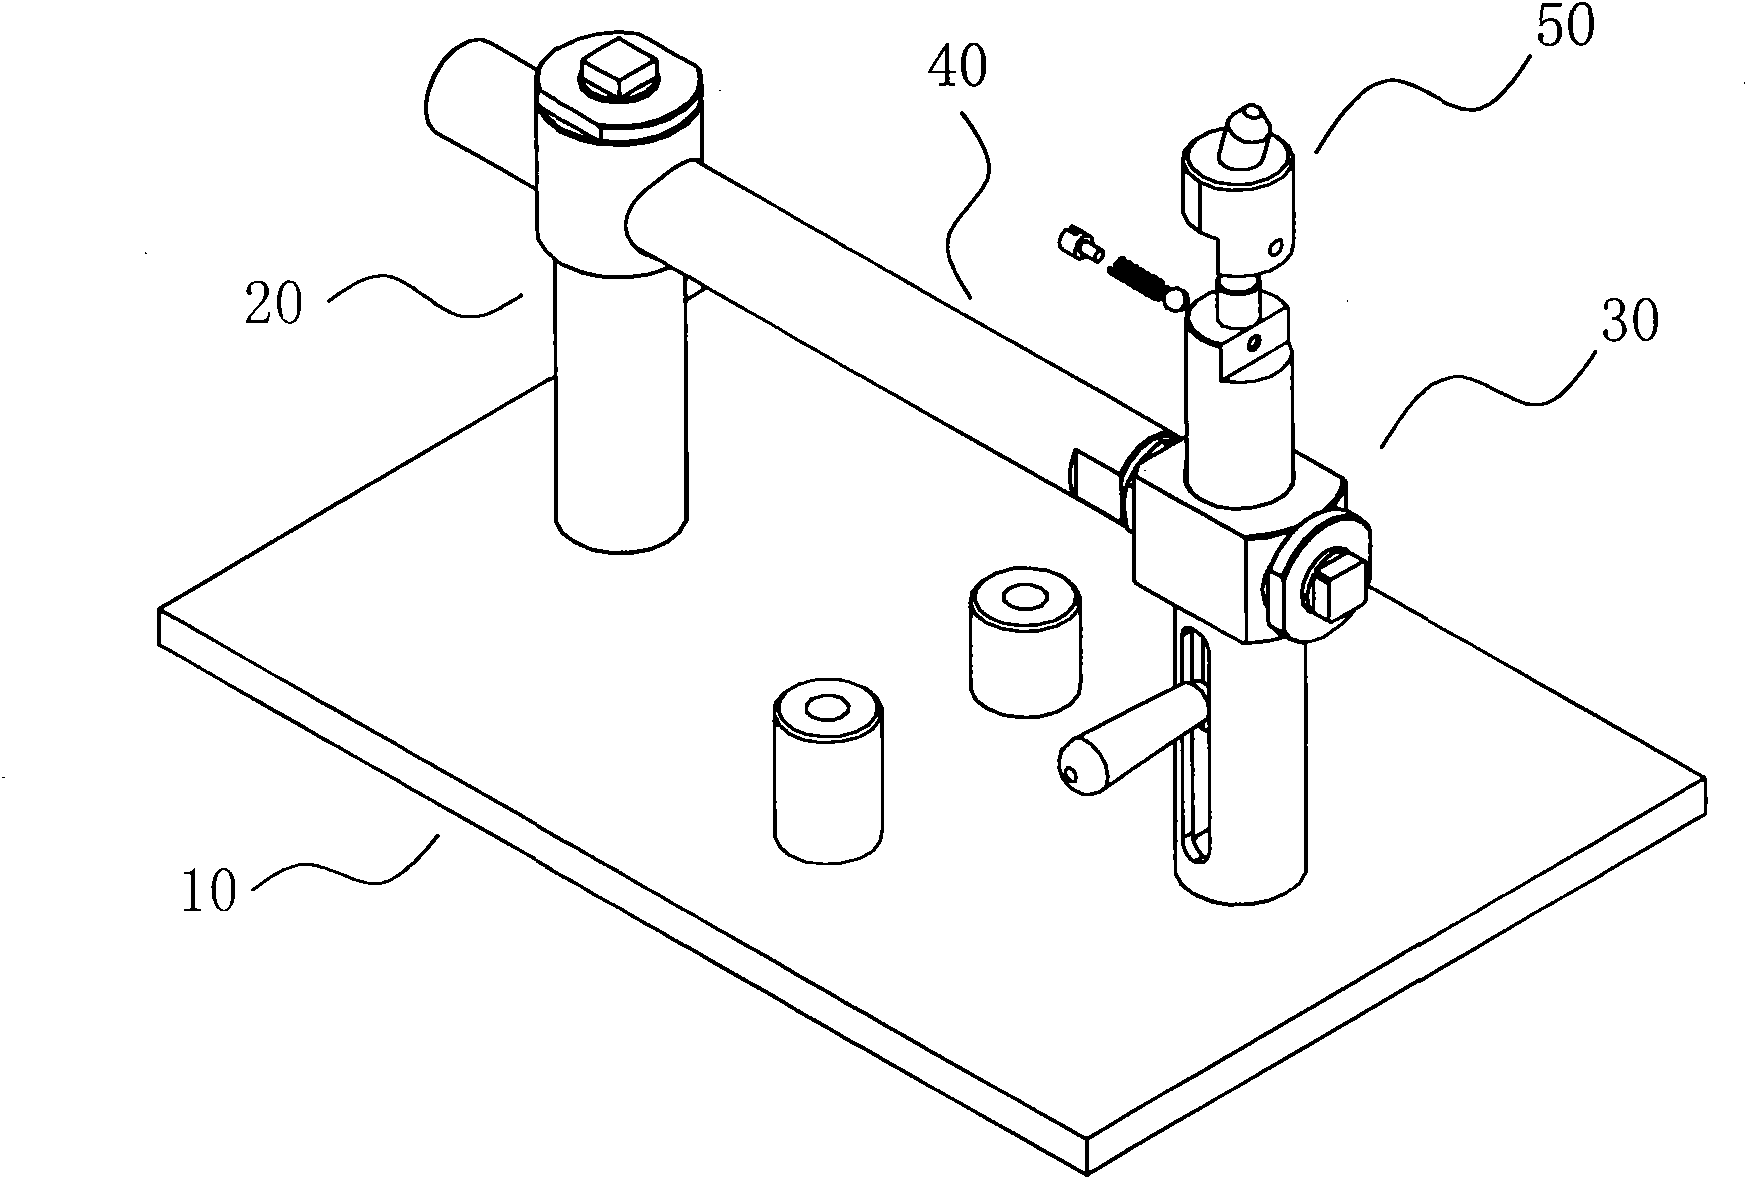 Locating and supporting device